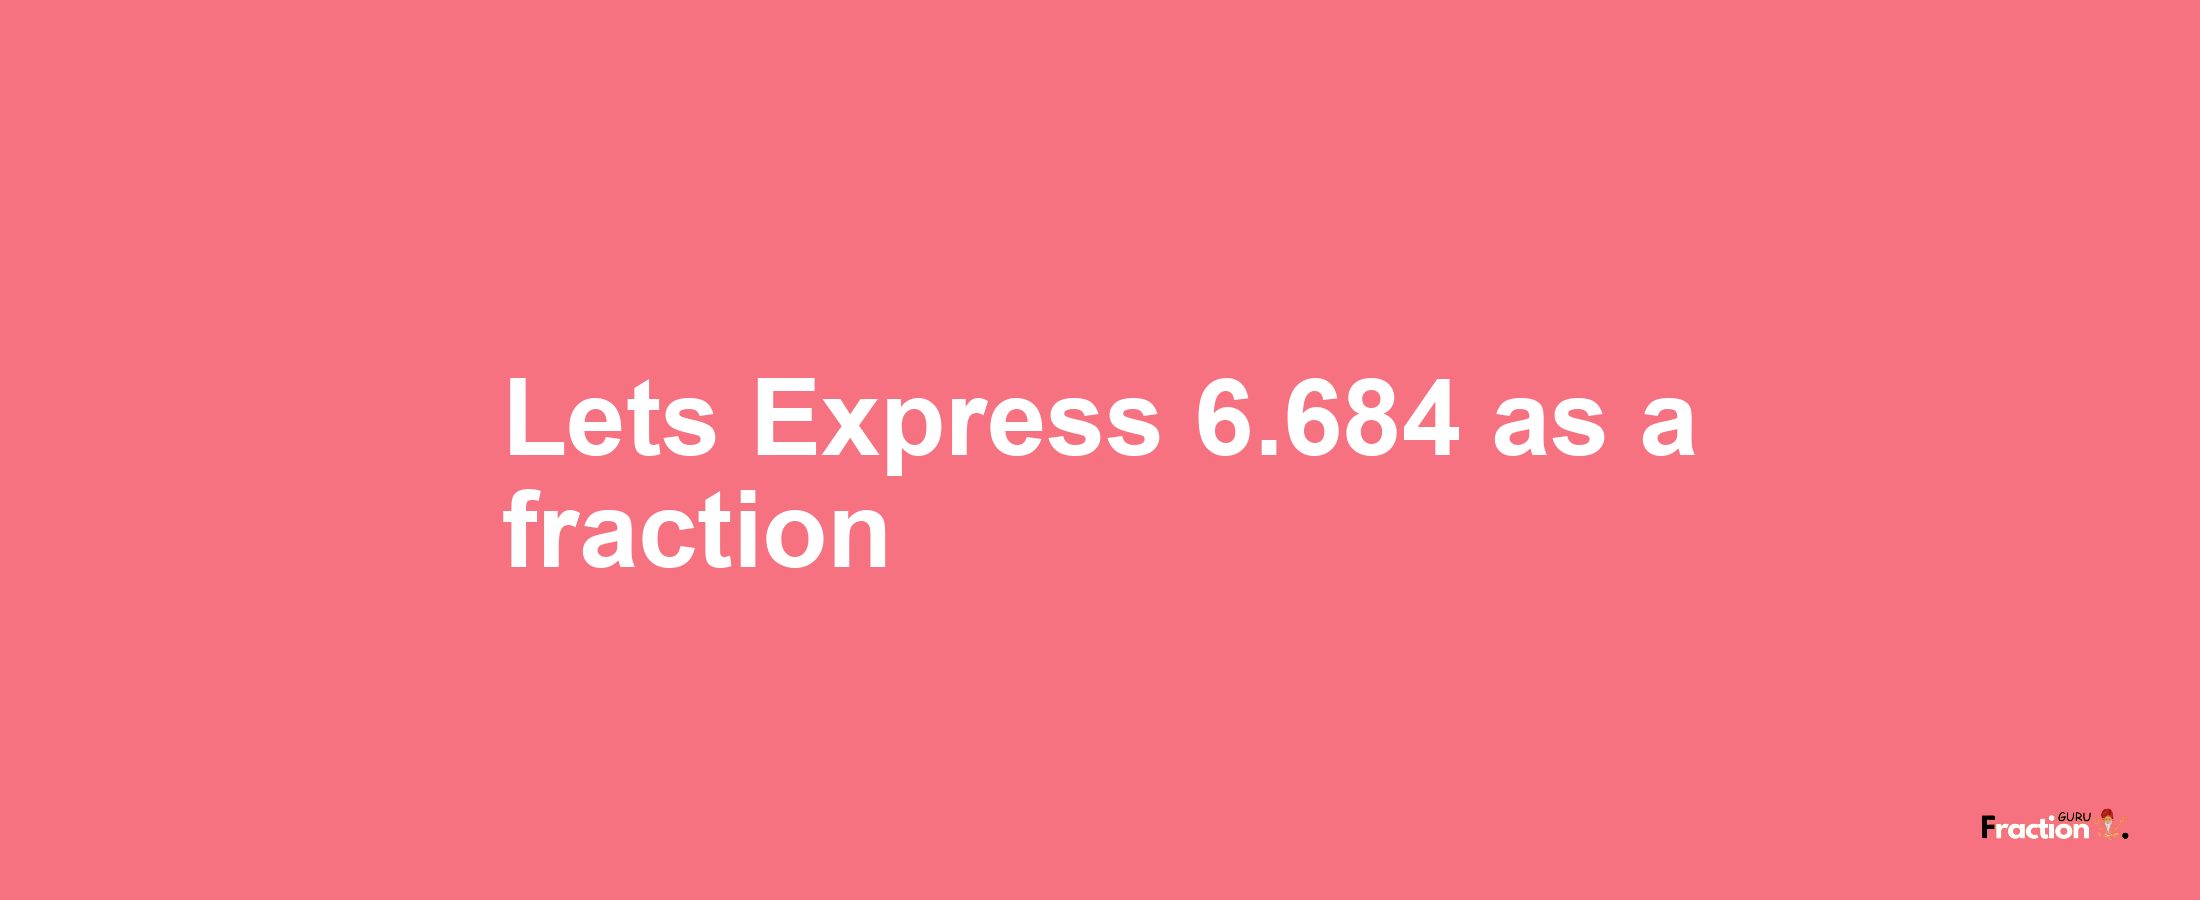 Lets Express 6.684 as afraction